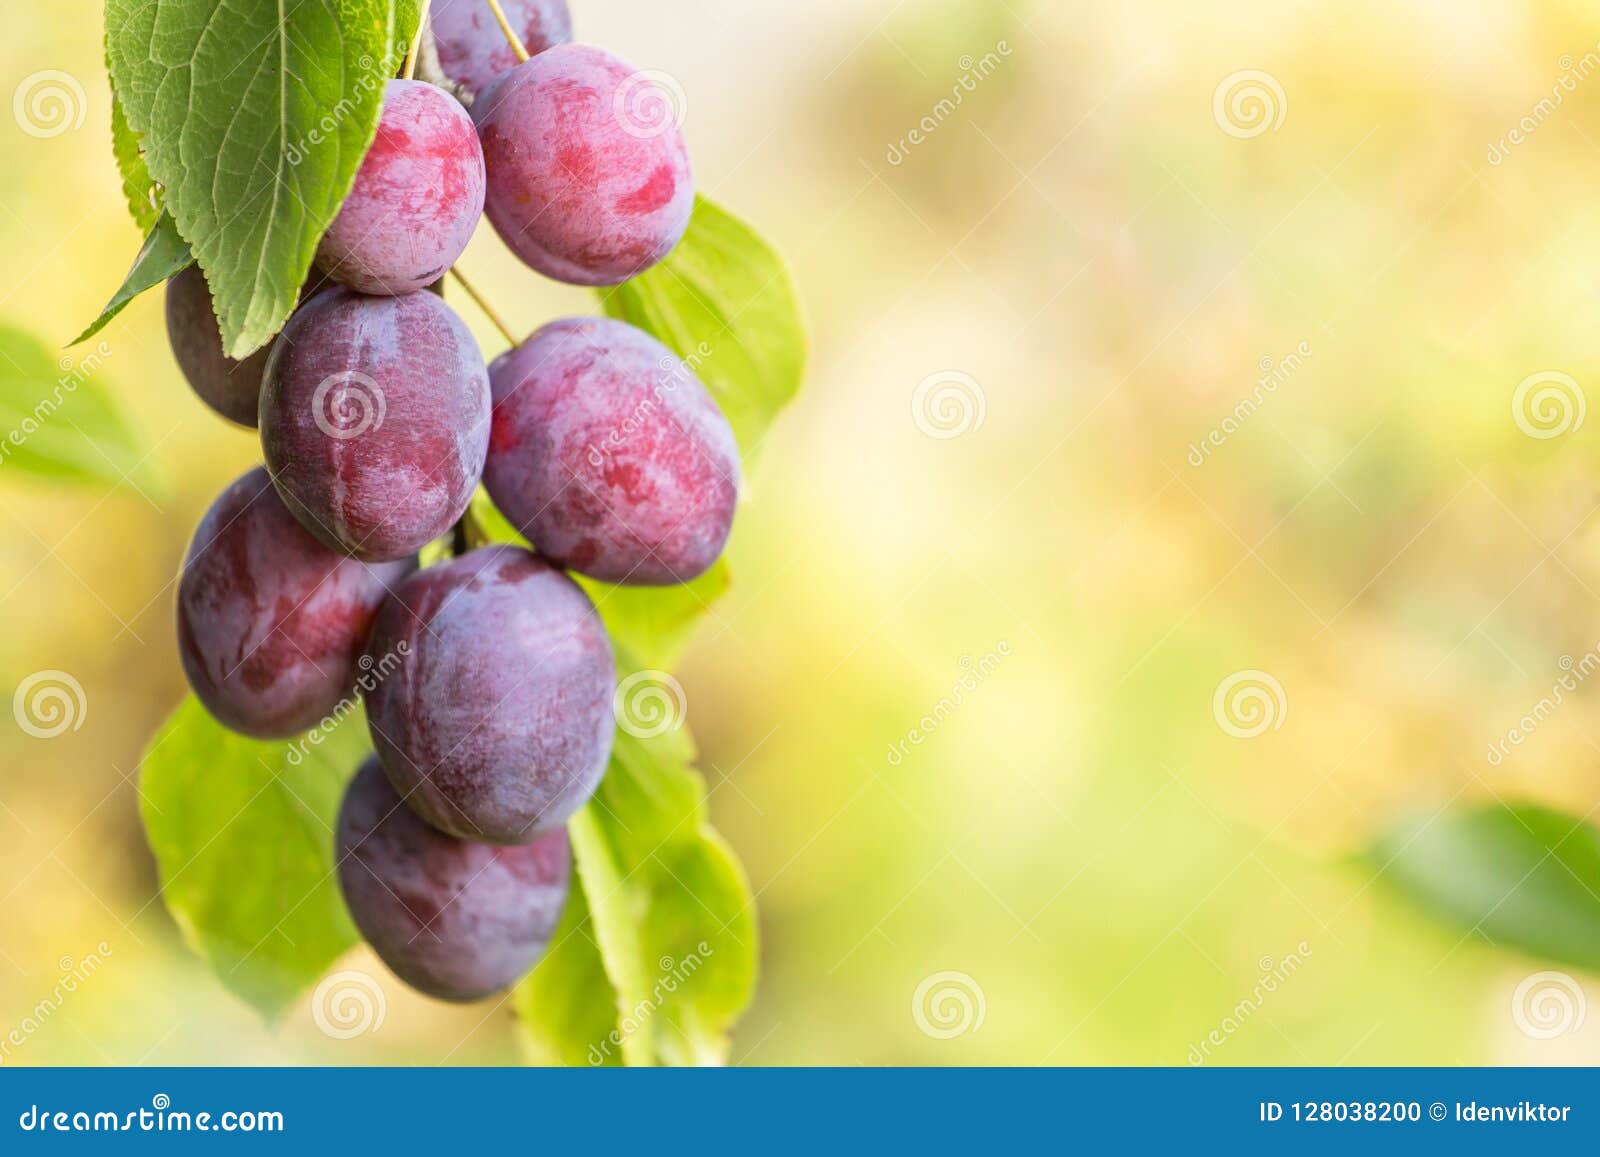 plums on the tree branch, background with copy space